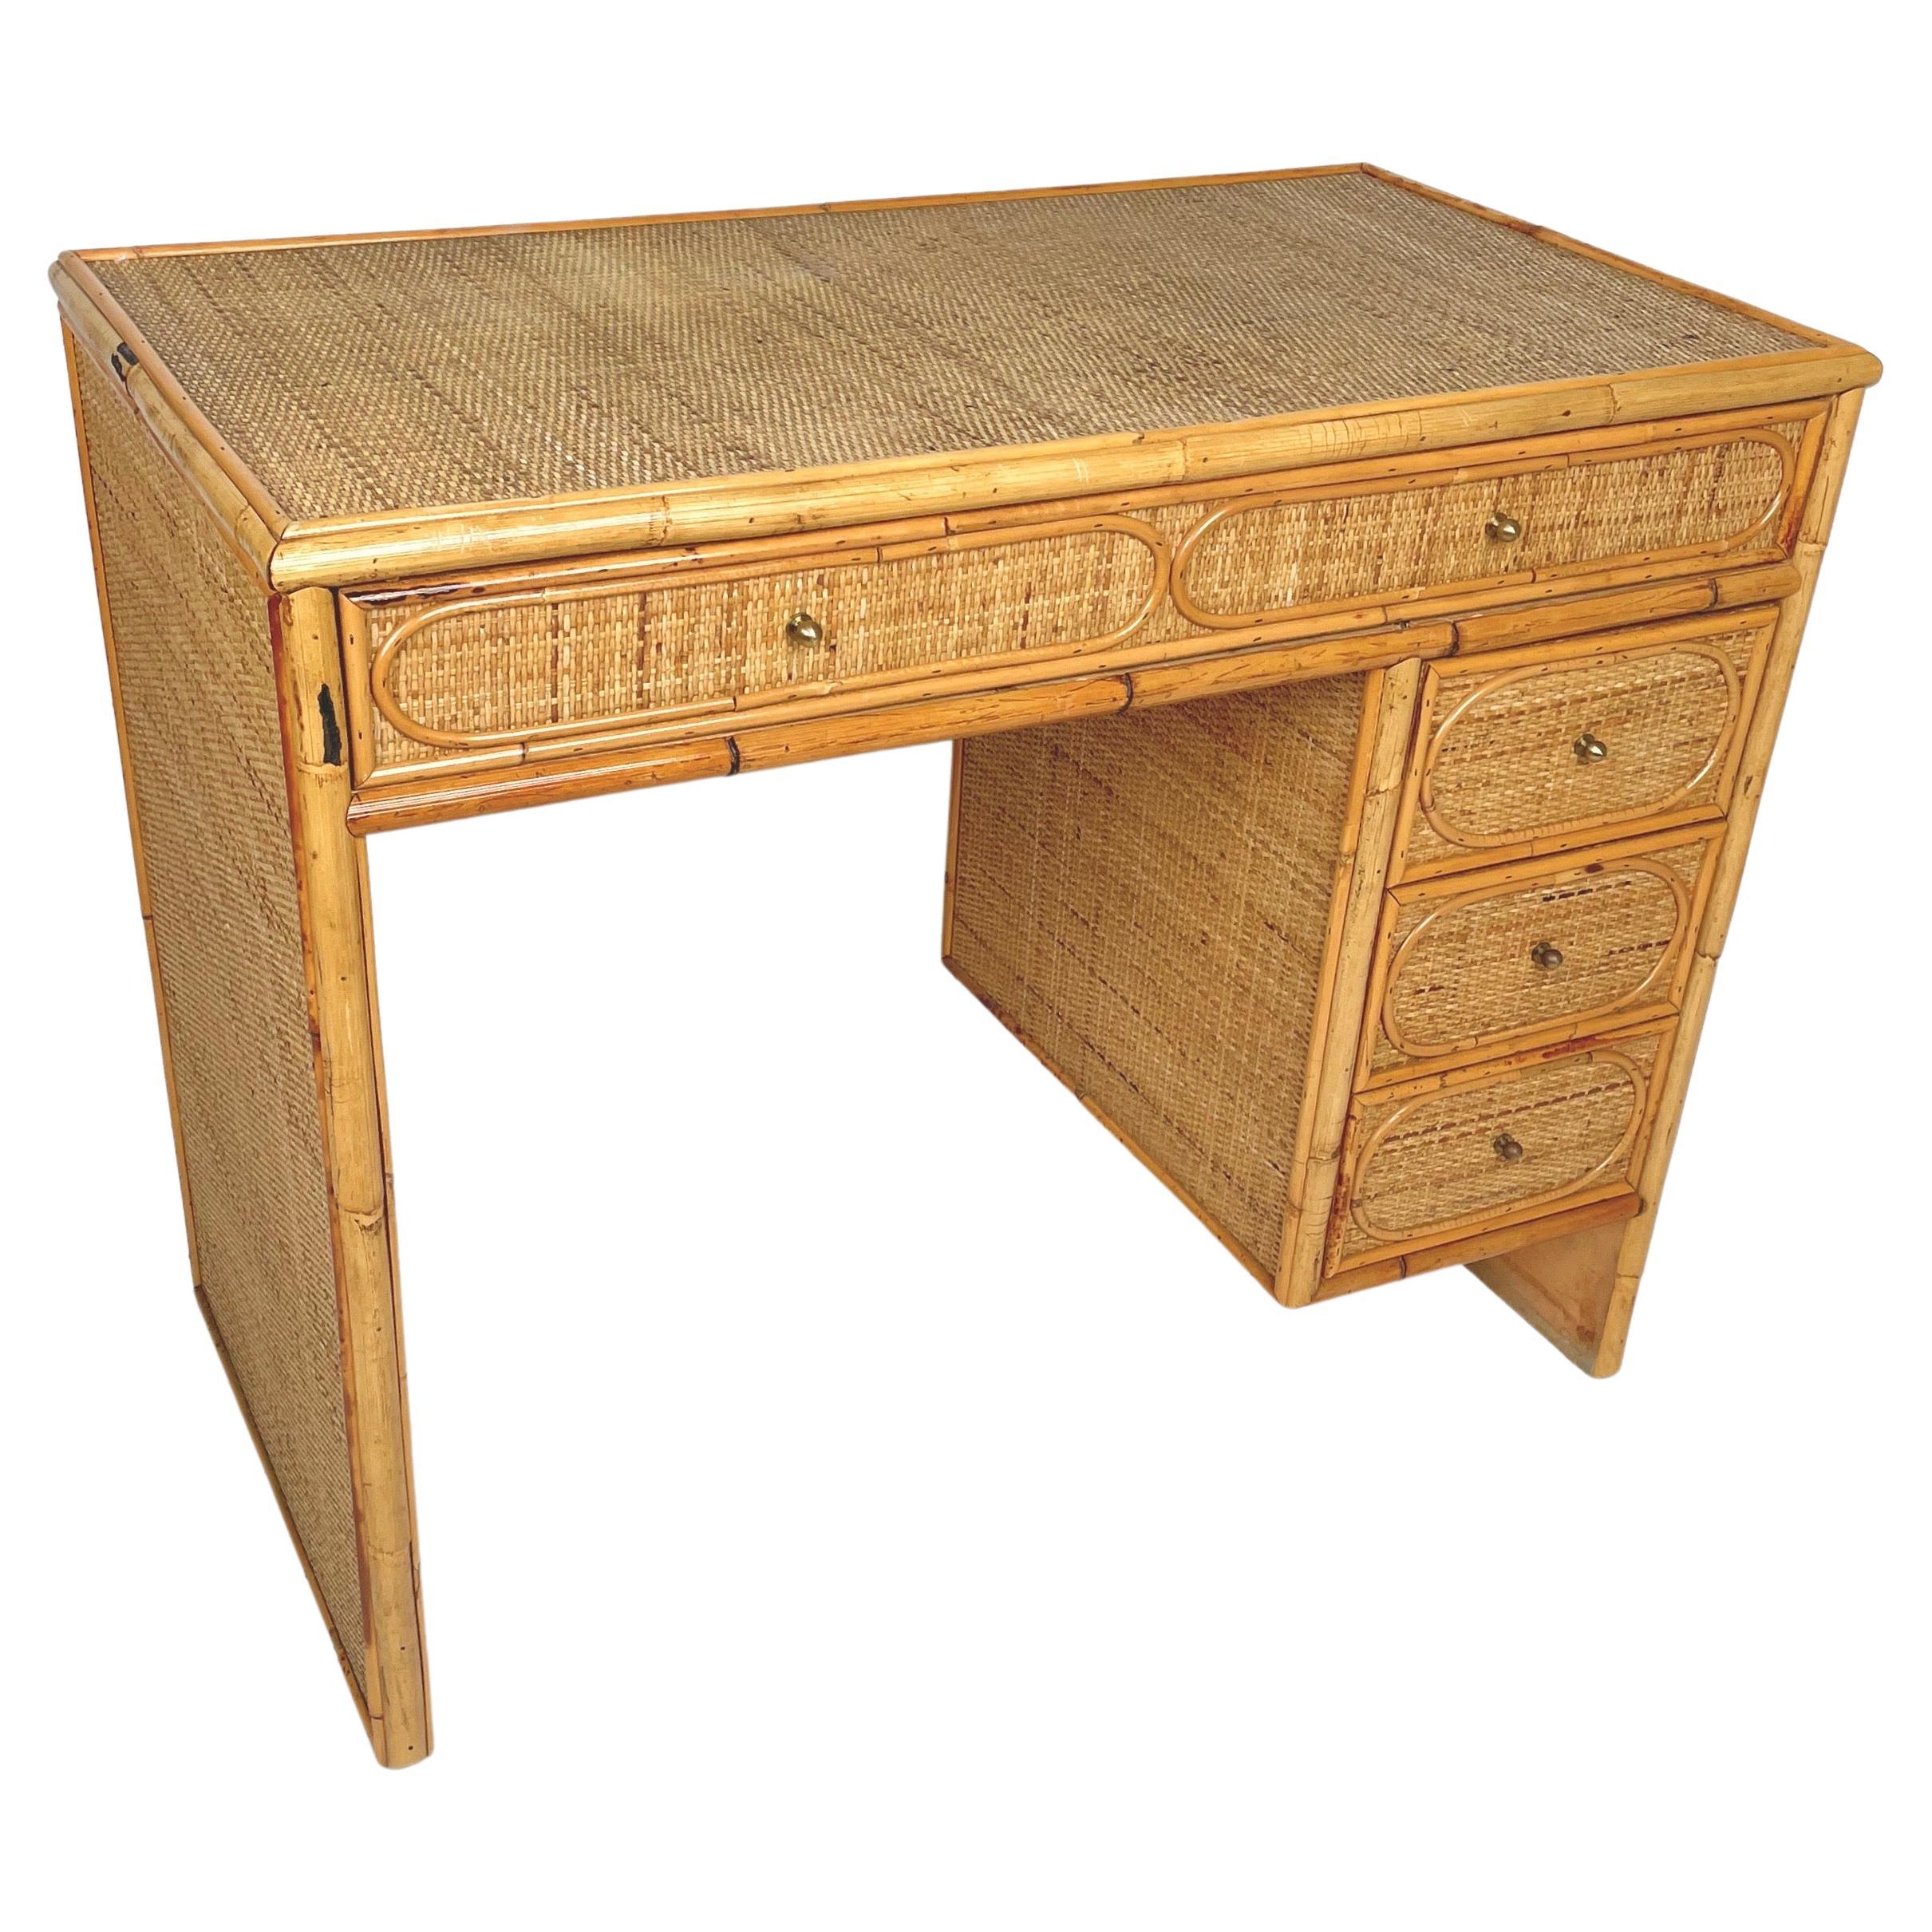 Midcentury Bamboo, Wicker and Rattan Italian Desk Table with Drawers, 1970s For Sale 1